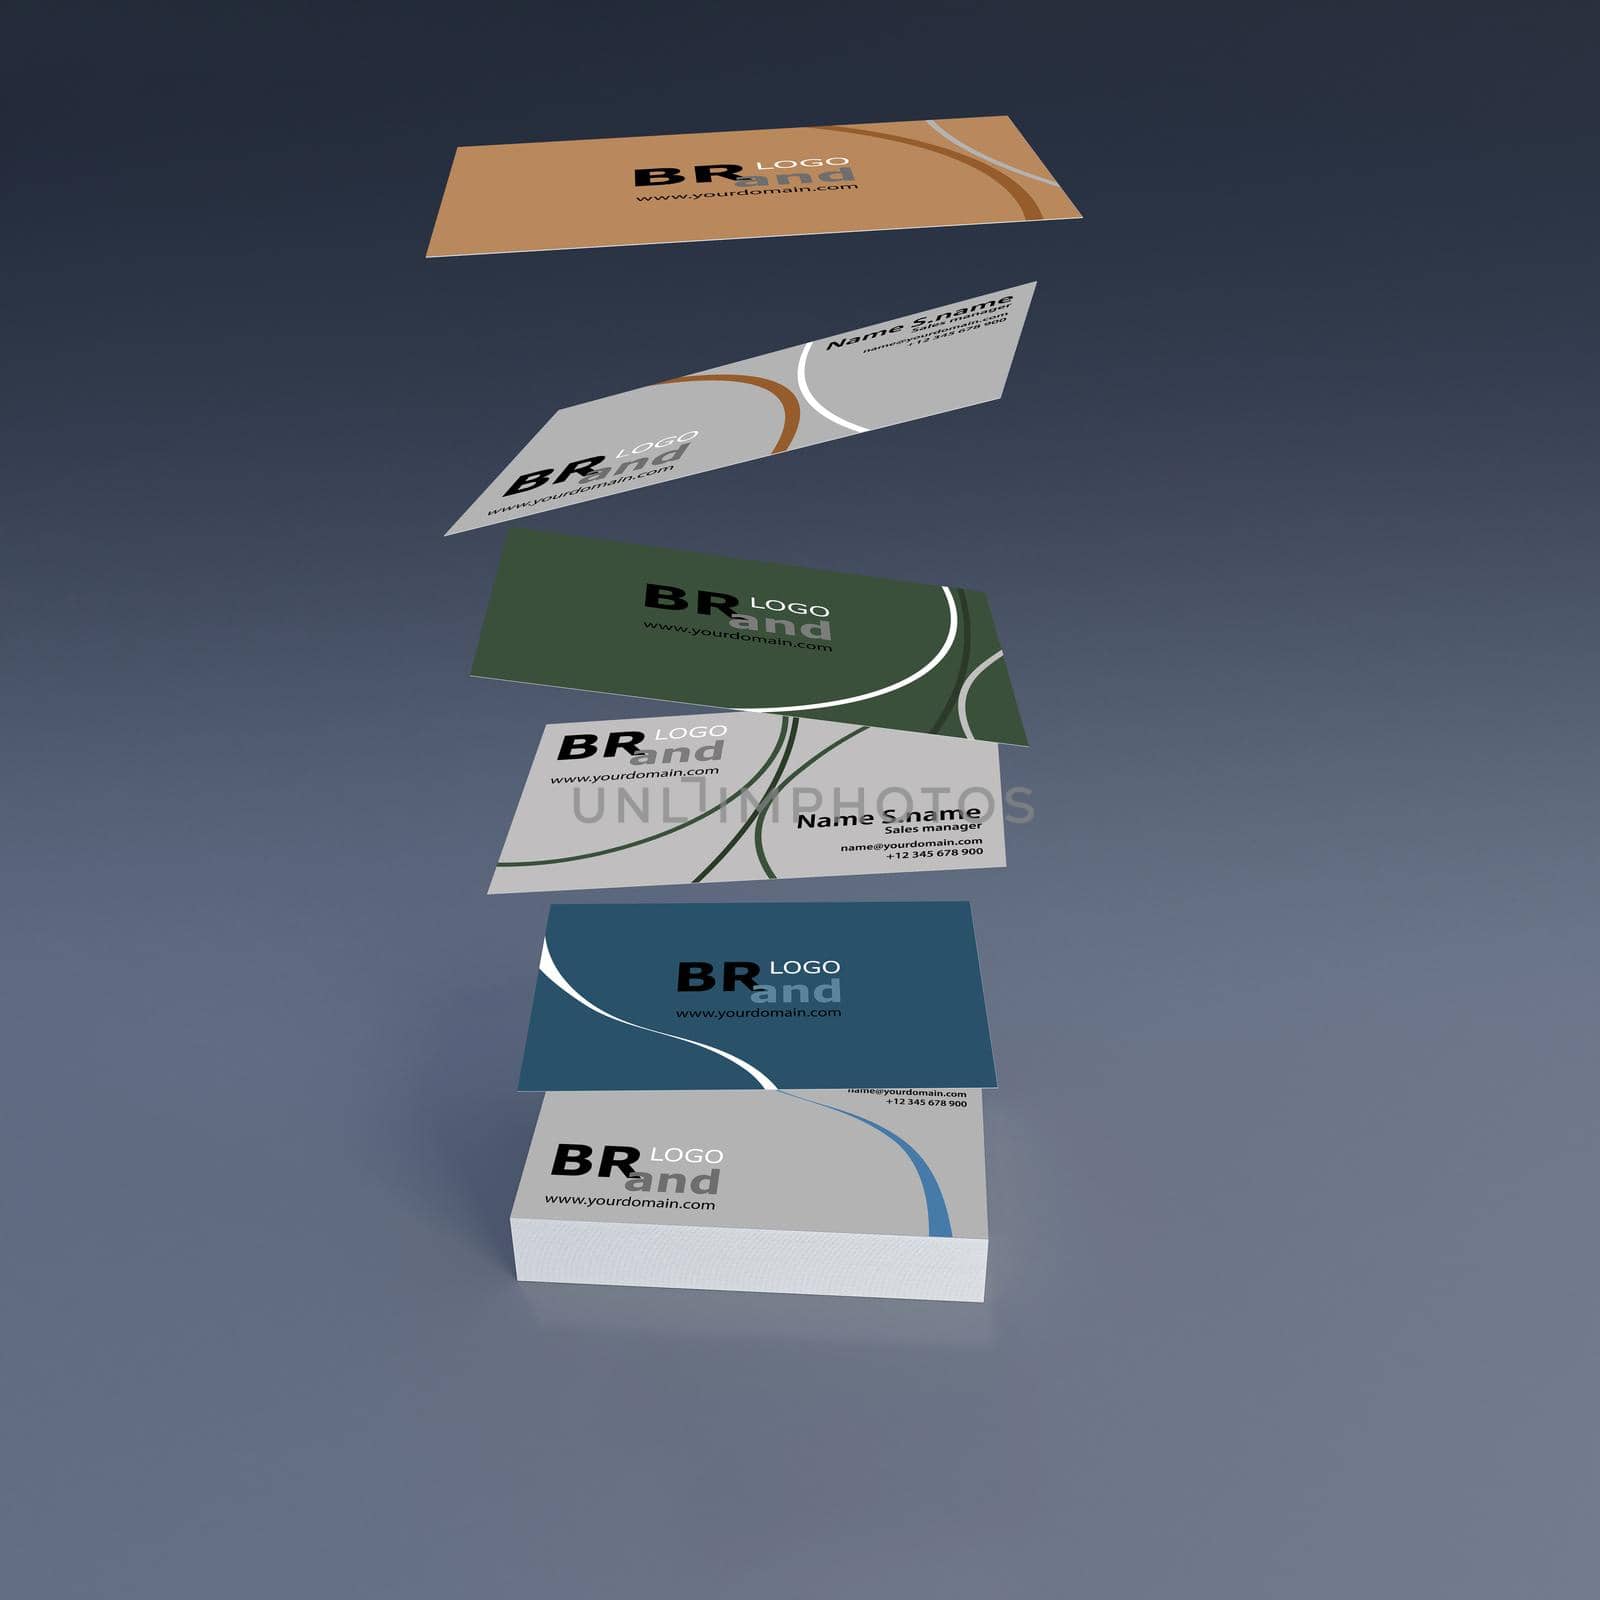 3d rendering of name cards.